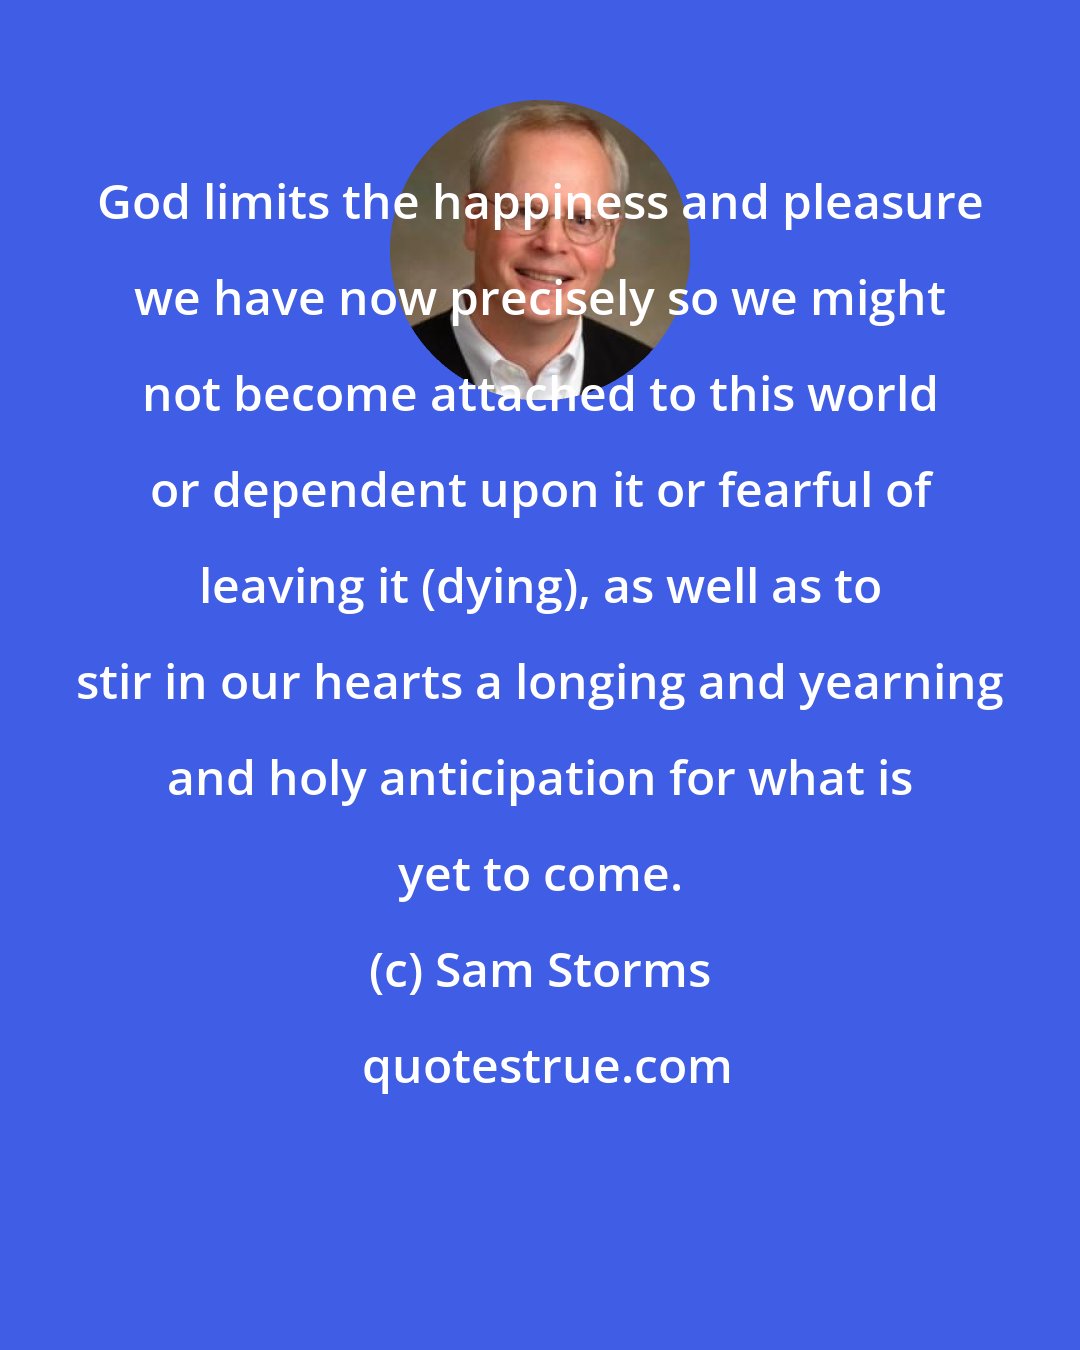 Sam Storms: God limits the happiness and pleasure we have now precisely so we might not become attached to this world or dependent upon it or fearful of leaving it (dying), as well as to stir in our hearts a longing and yearning and holy anticipation for what is yet to come.